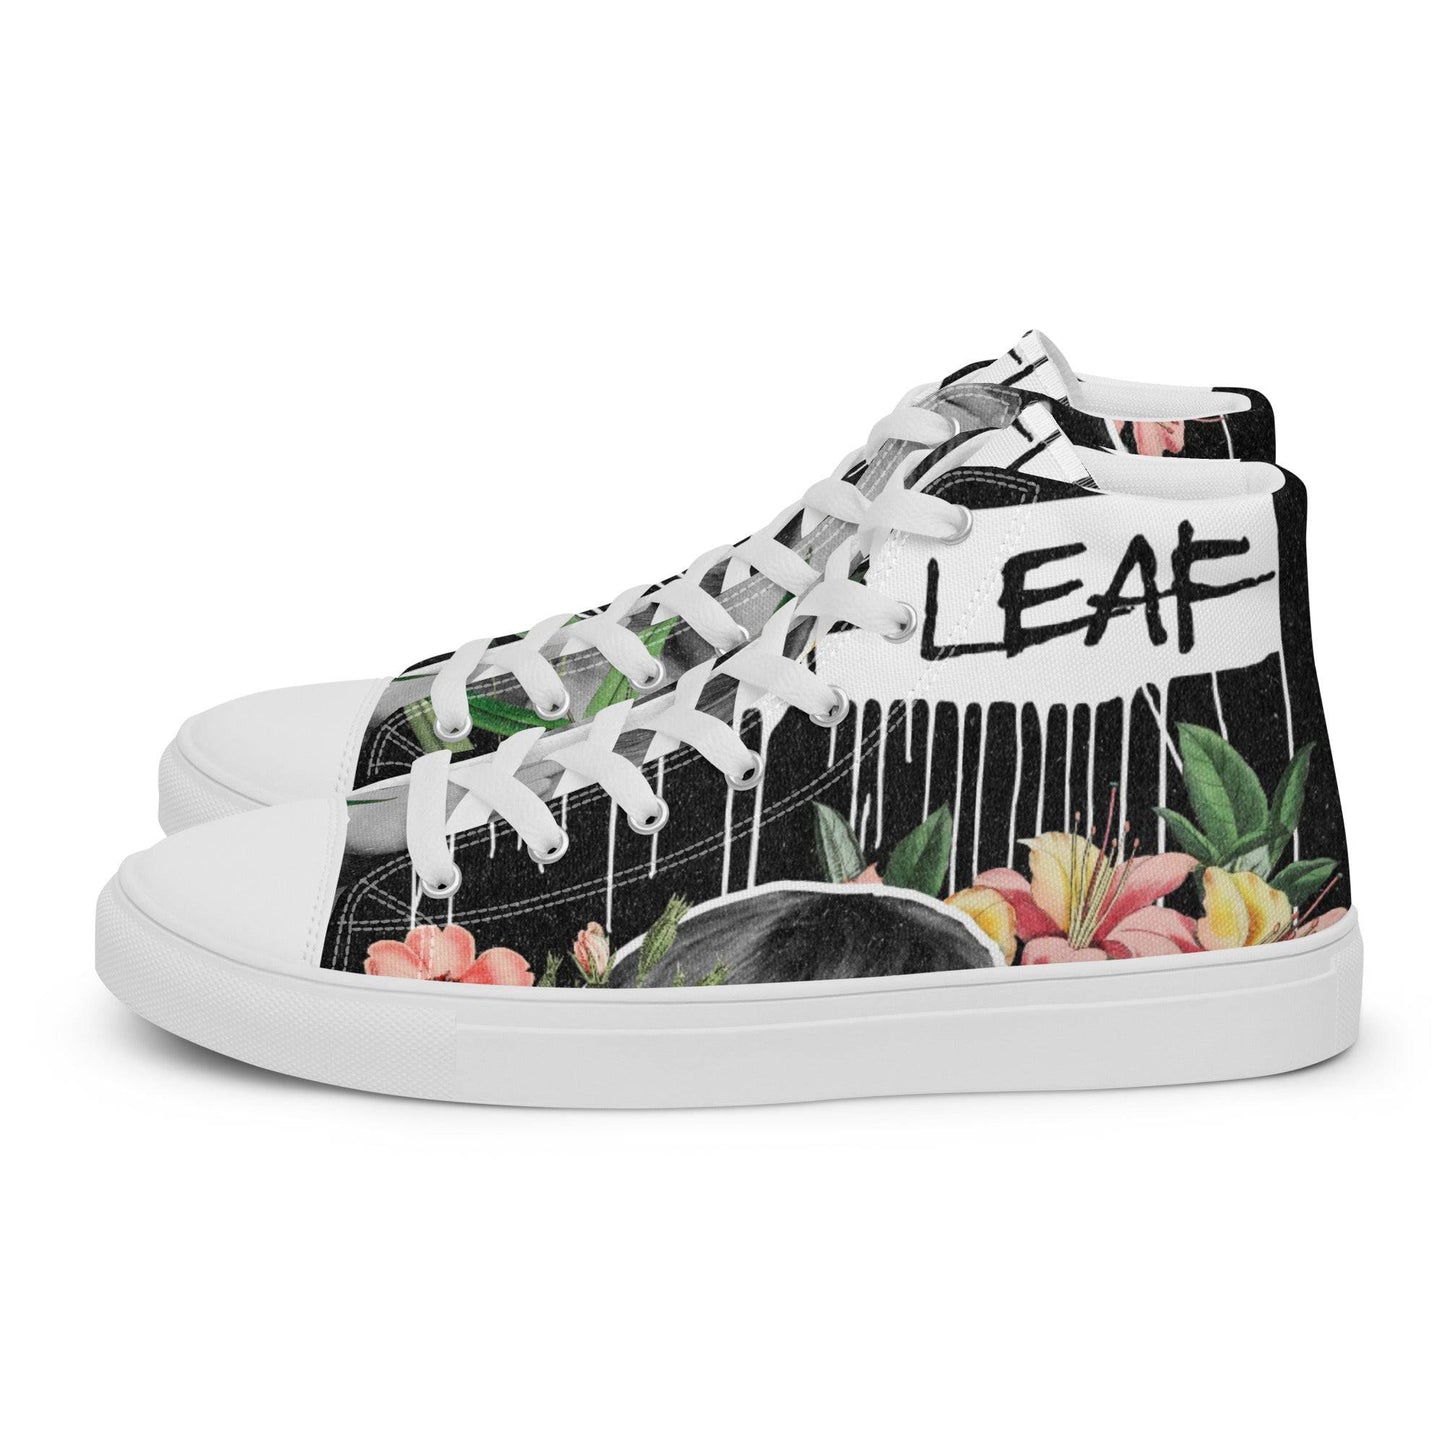 Men’s High Top Canvas Shoes - Cry Baby - Lunar Leaf